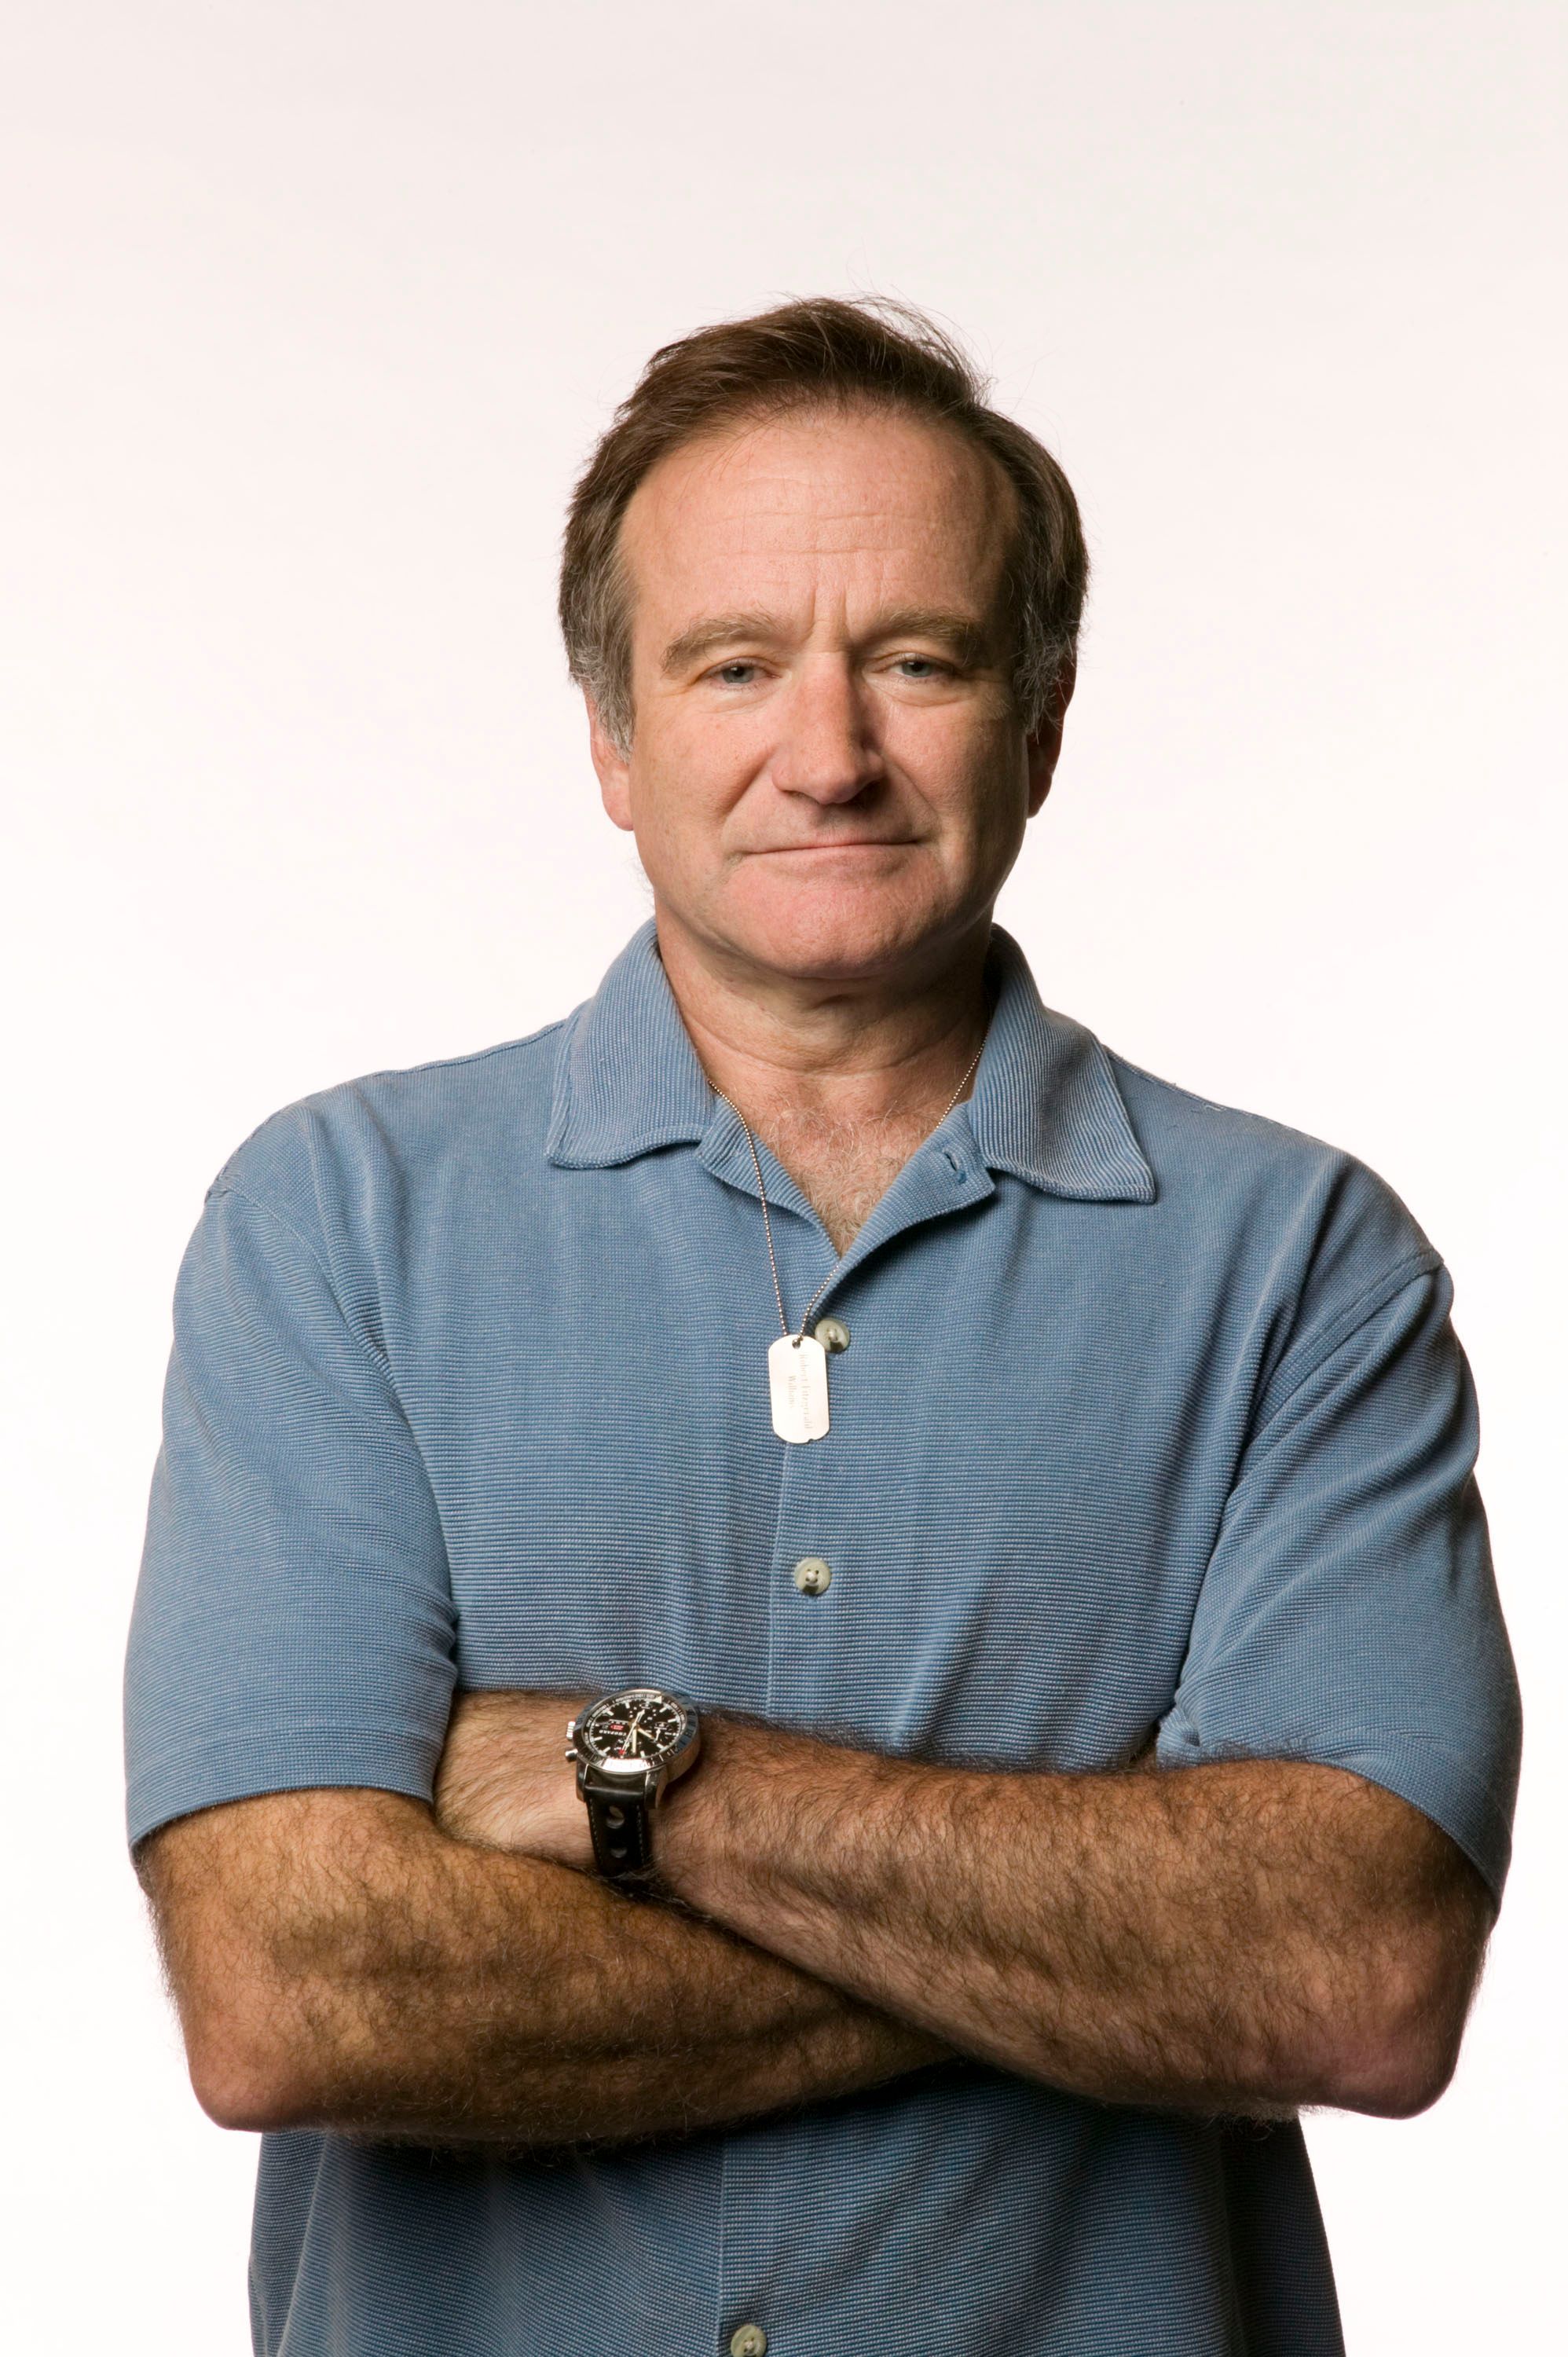 Late Actor Robin Williams in a promotional portrait for the Search for the Cause campaign, which raises funds for cancer research on November 21, 2005 | Photo: Getty Images